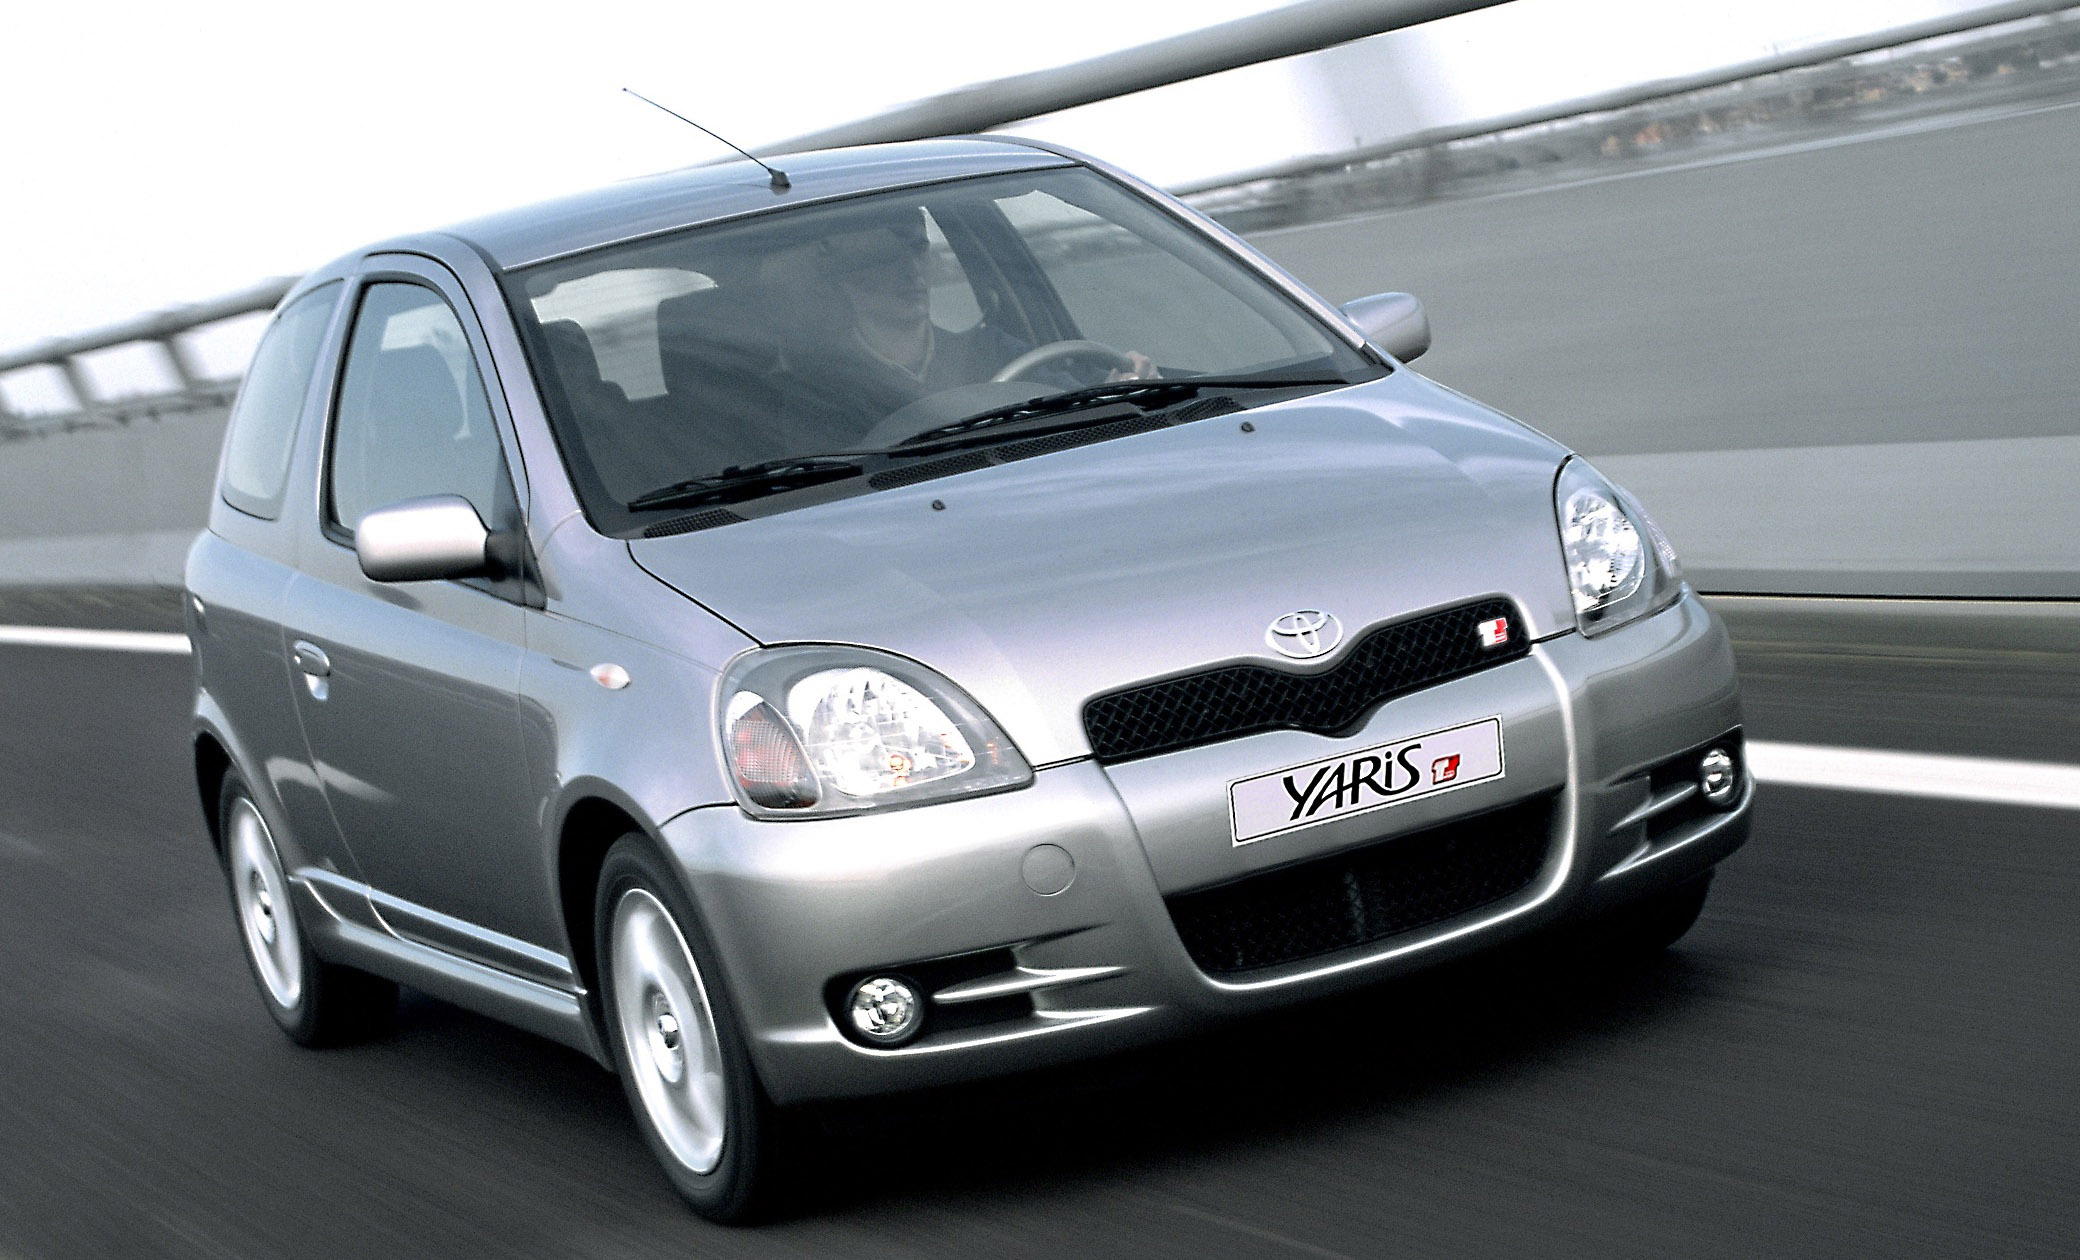 Toyota Yaris 2001 Review, Amazing Pictures and Images